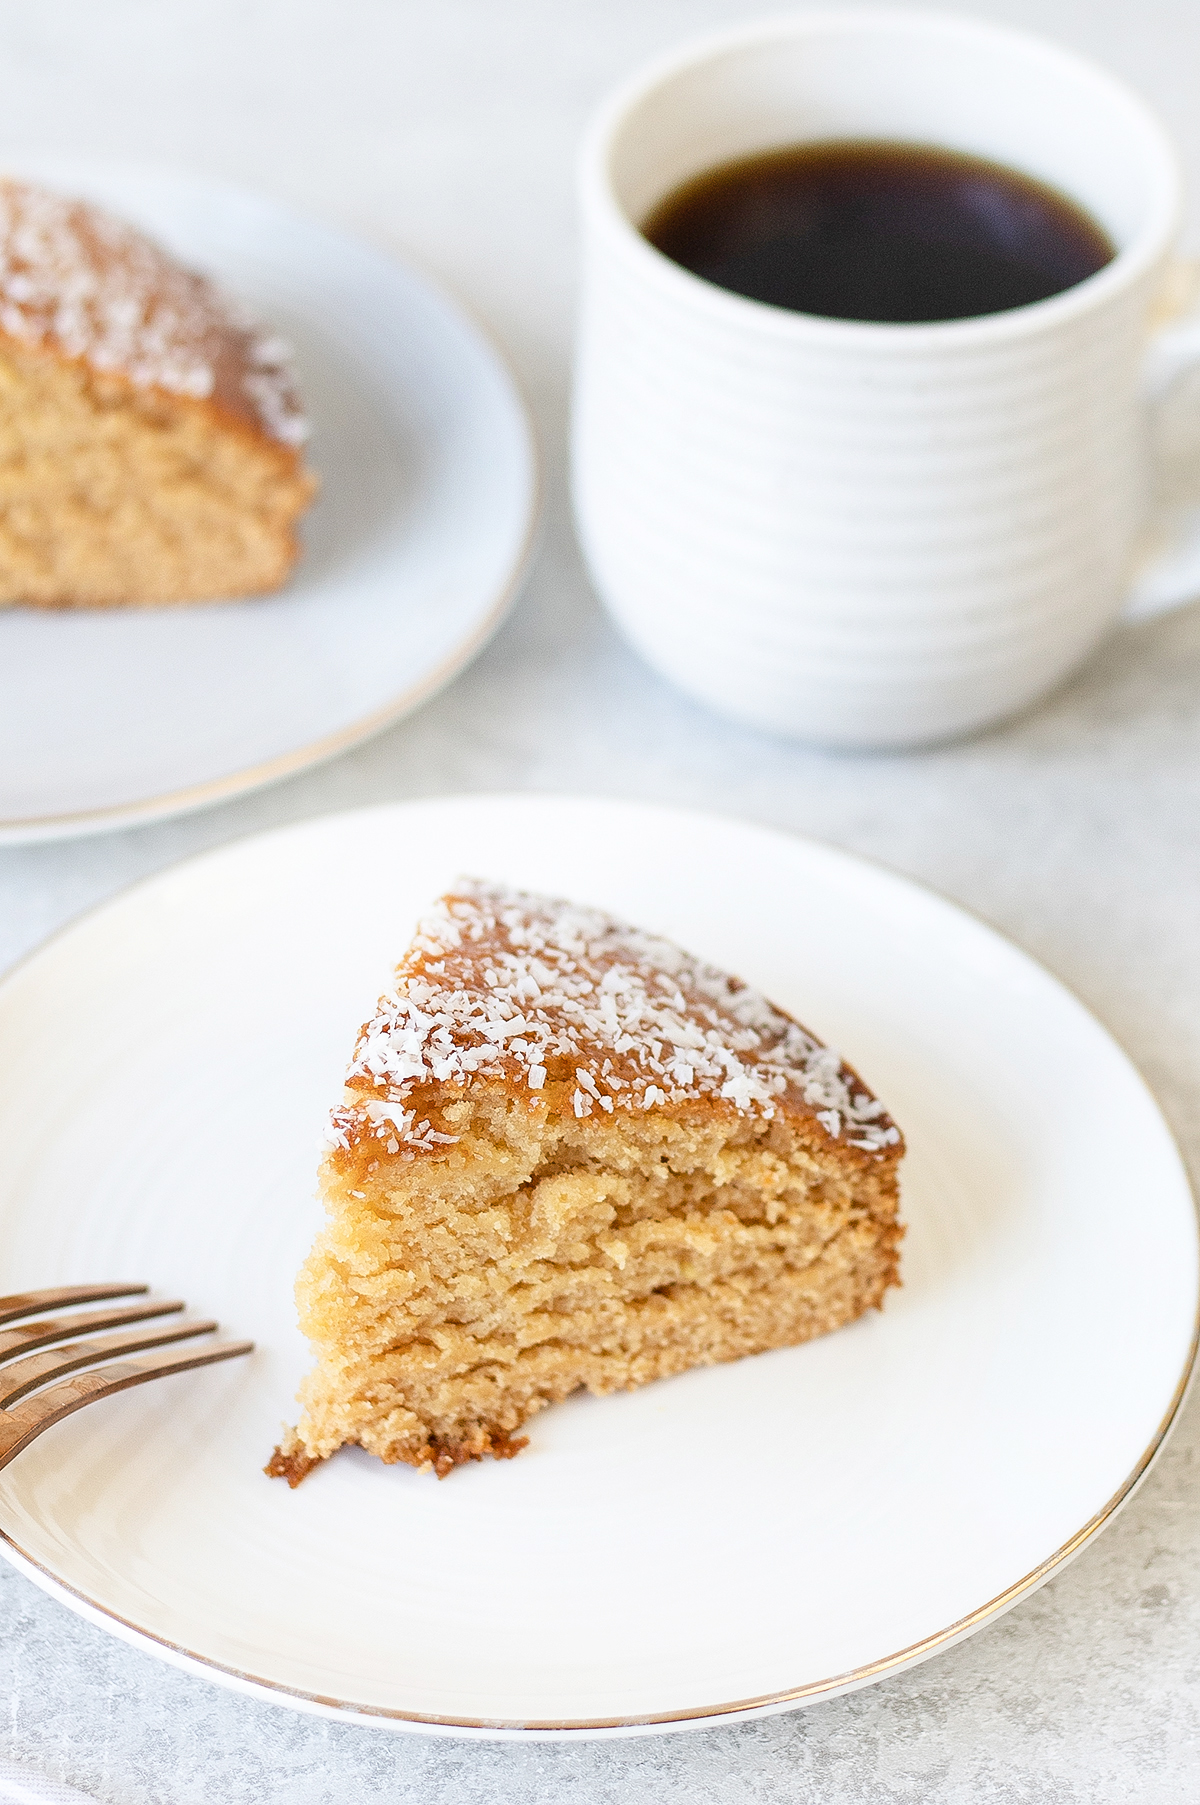 Golden Syrup Cake is a moist sponge cake made with golden syrup